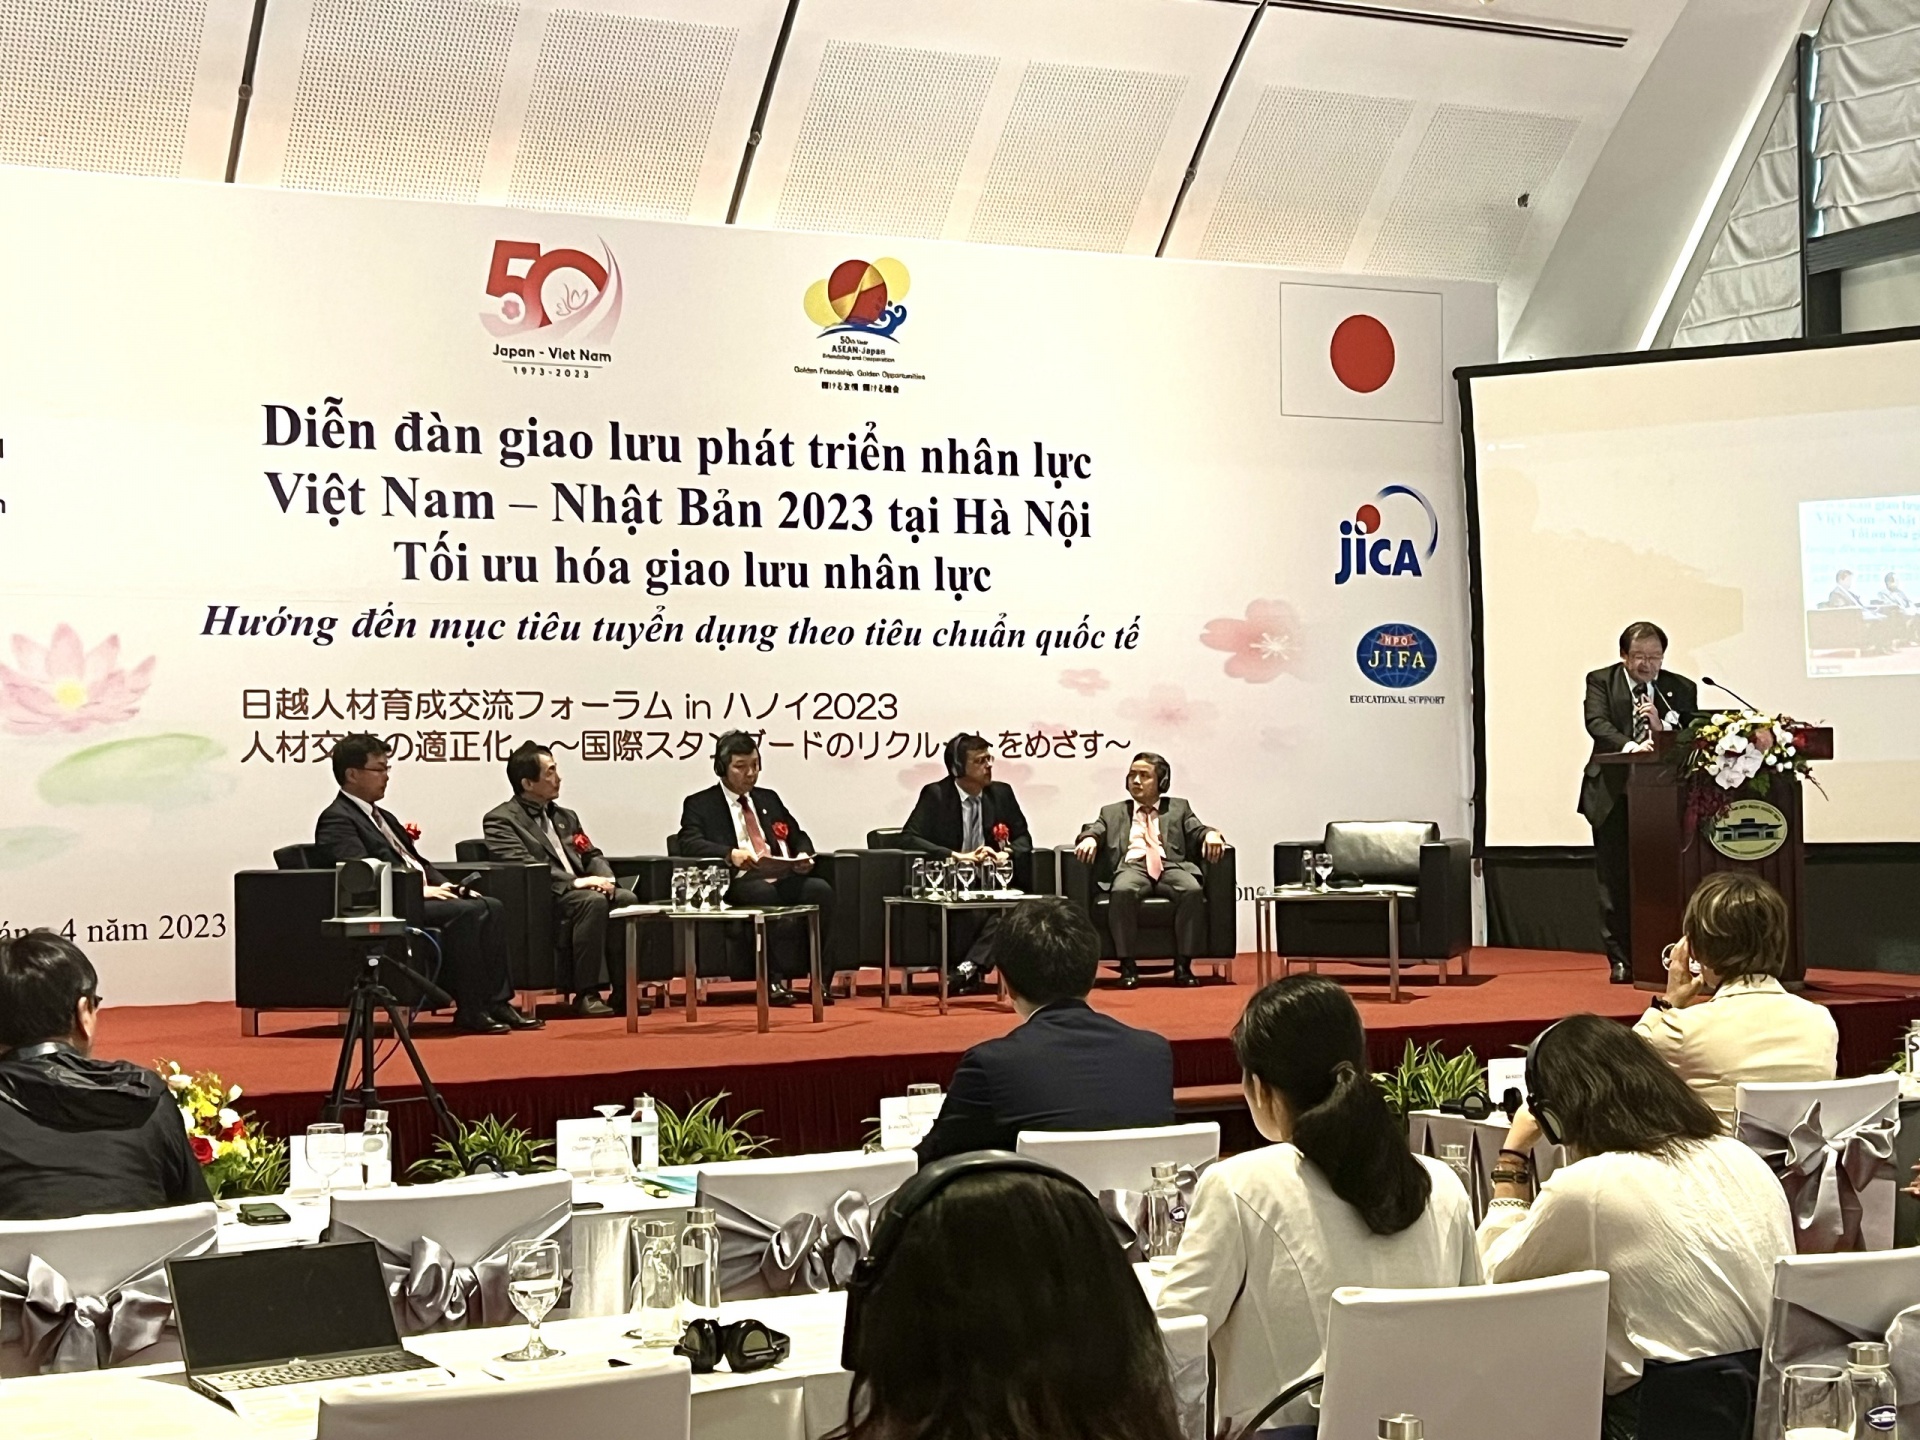 JICA and ILO promote cooperation between Vietnam and Japan